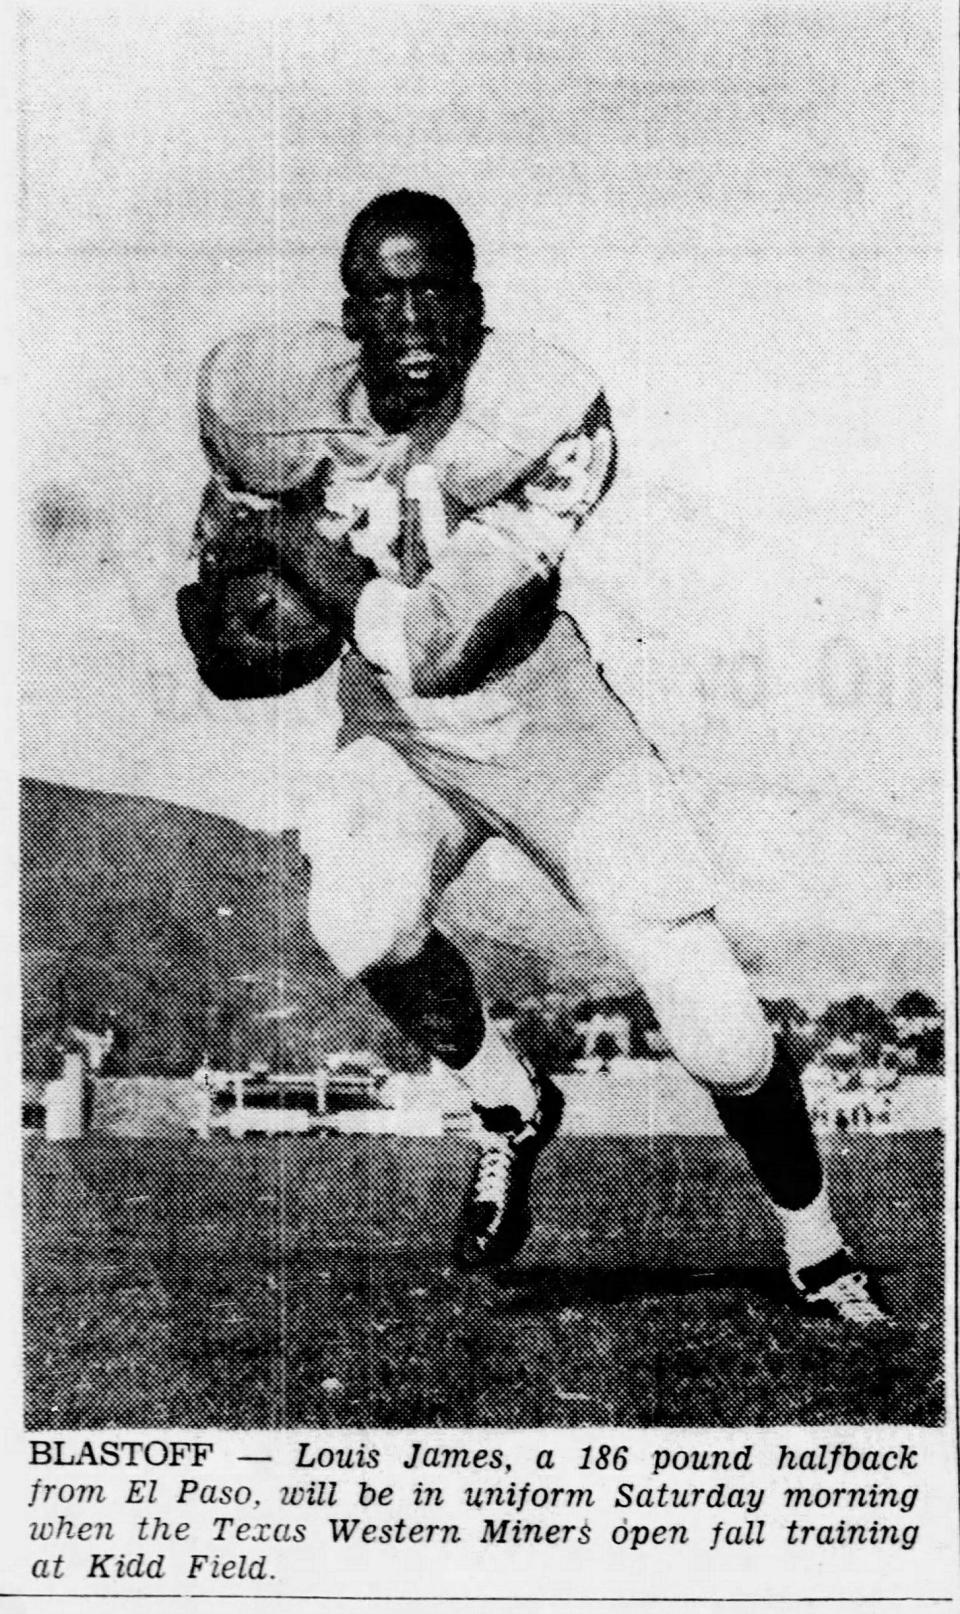 Former Bel Air High School star athlete Louis James died Tuesday at the age of 81. He later played at Texas Western in college, with Philadelphia in the NFL and was a successful high school coach in El Paso.